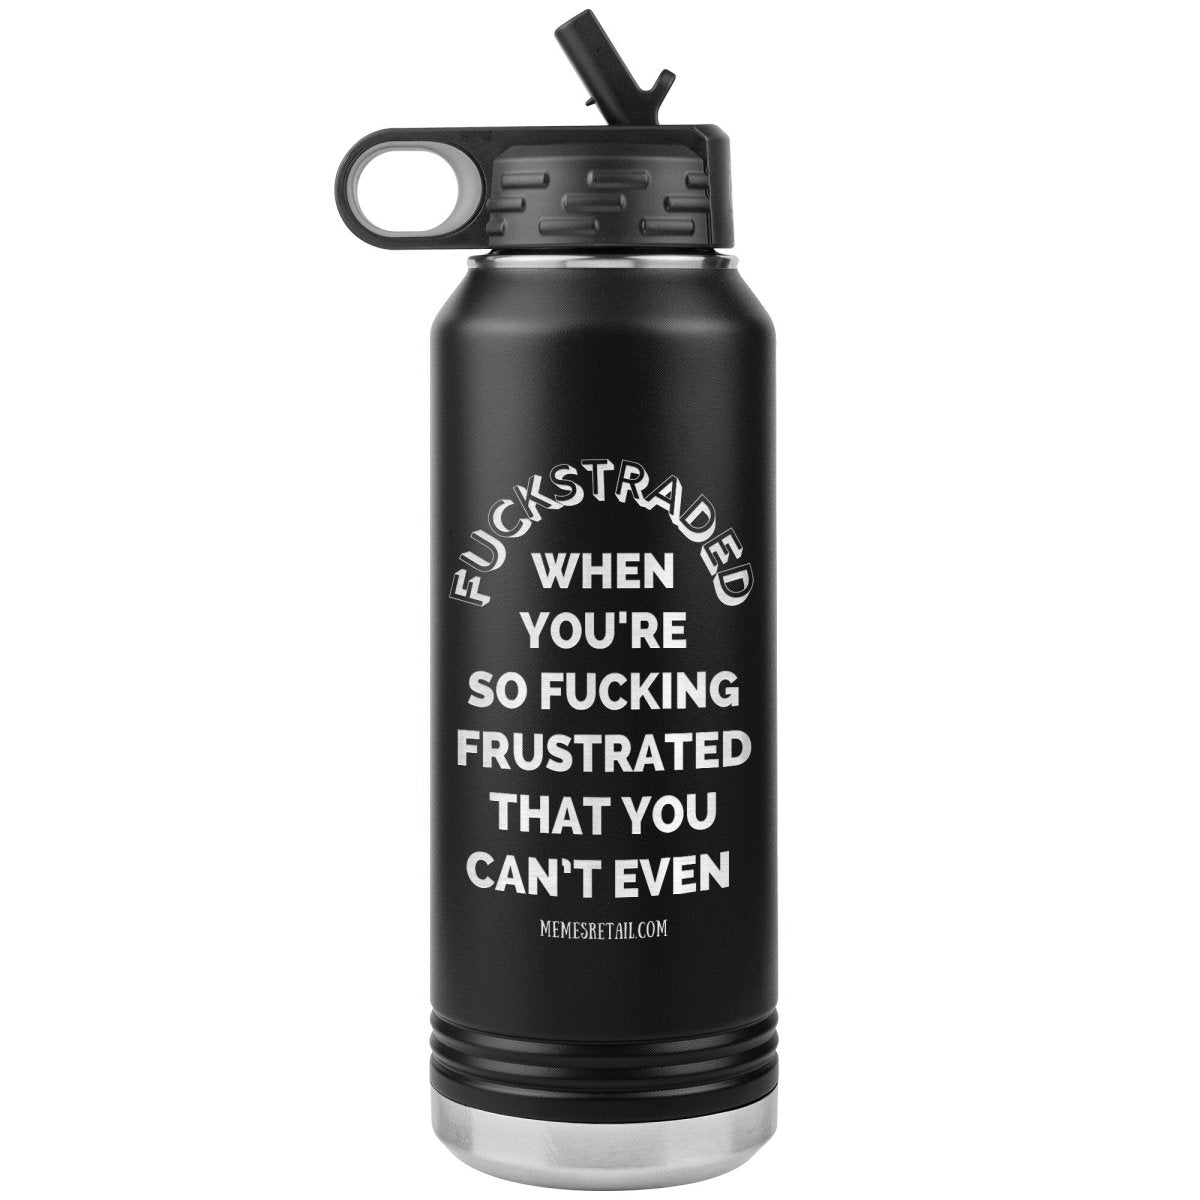 Fuckstraded, When You're So Fucking Frustrated That You Can’t Even - 32oz Water Tumblers, Black - MemesRetail.com